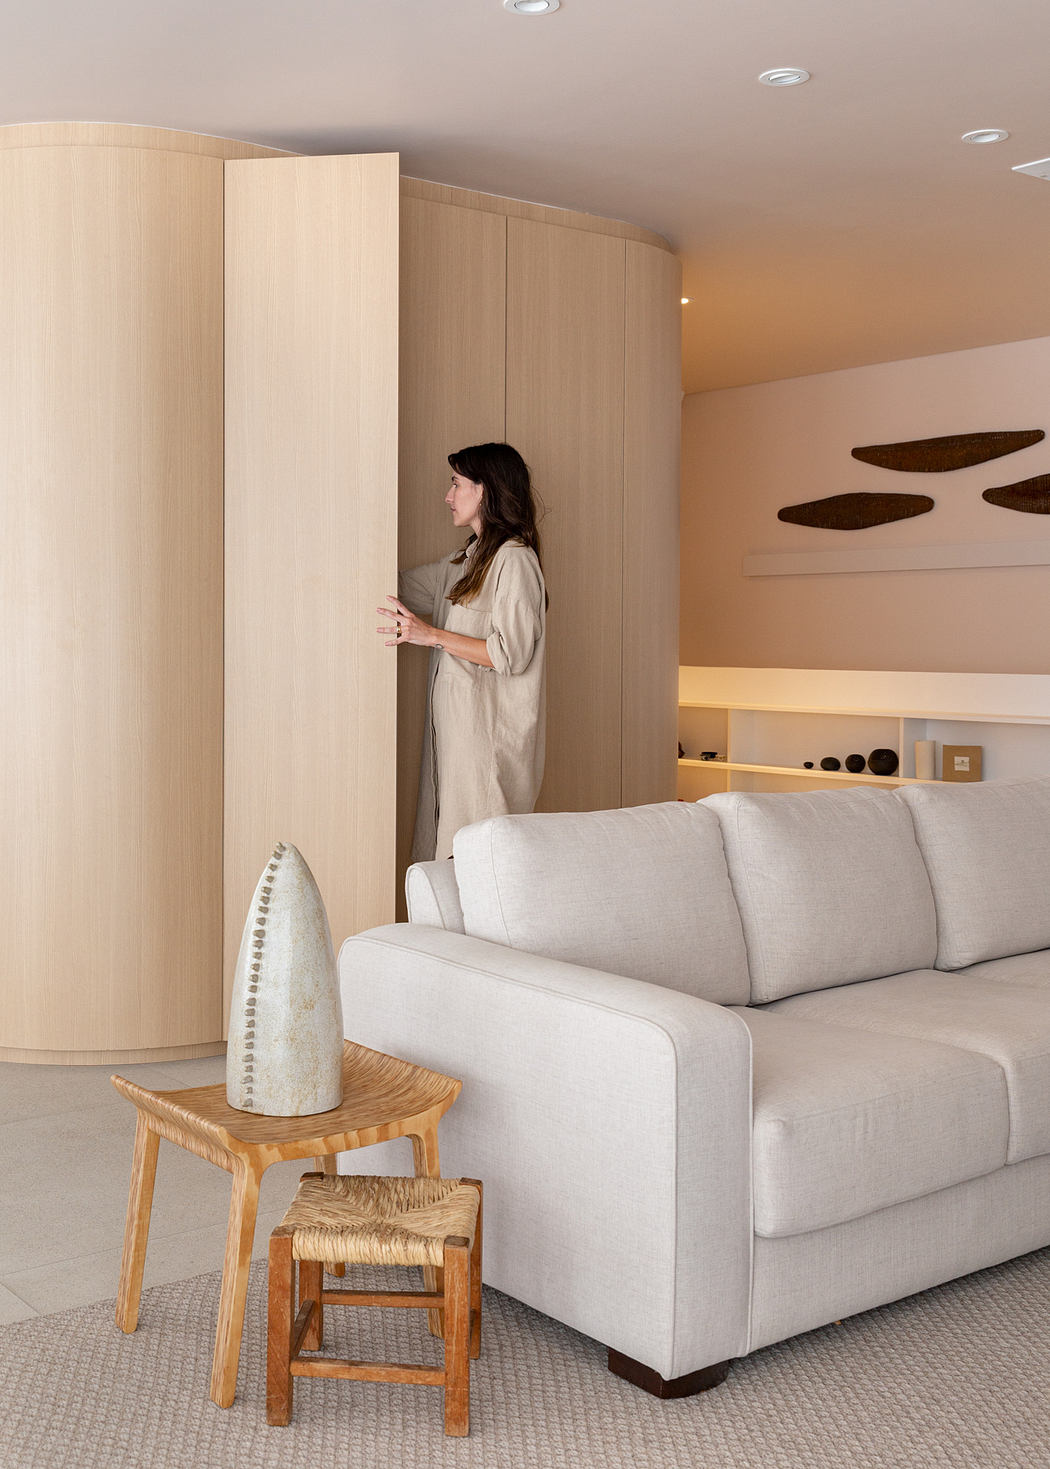 Modern living room with curved wood panels, a woman standing, a sofa, and